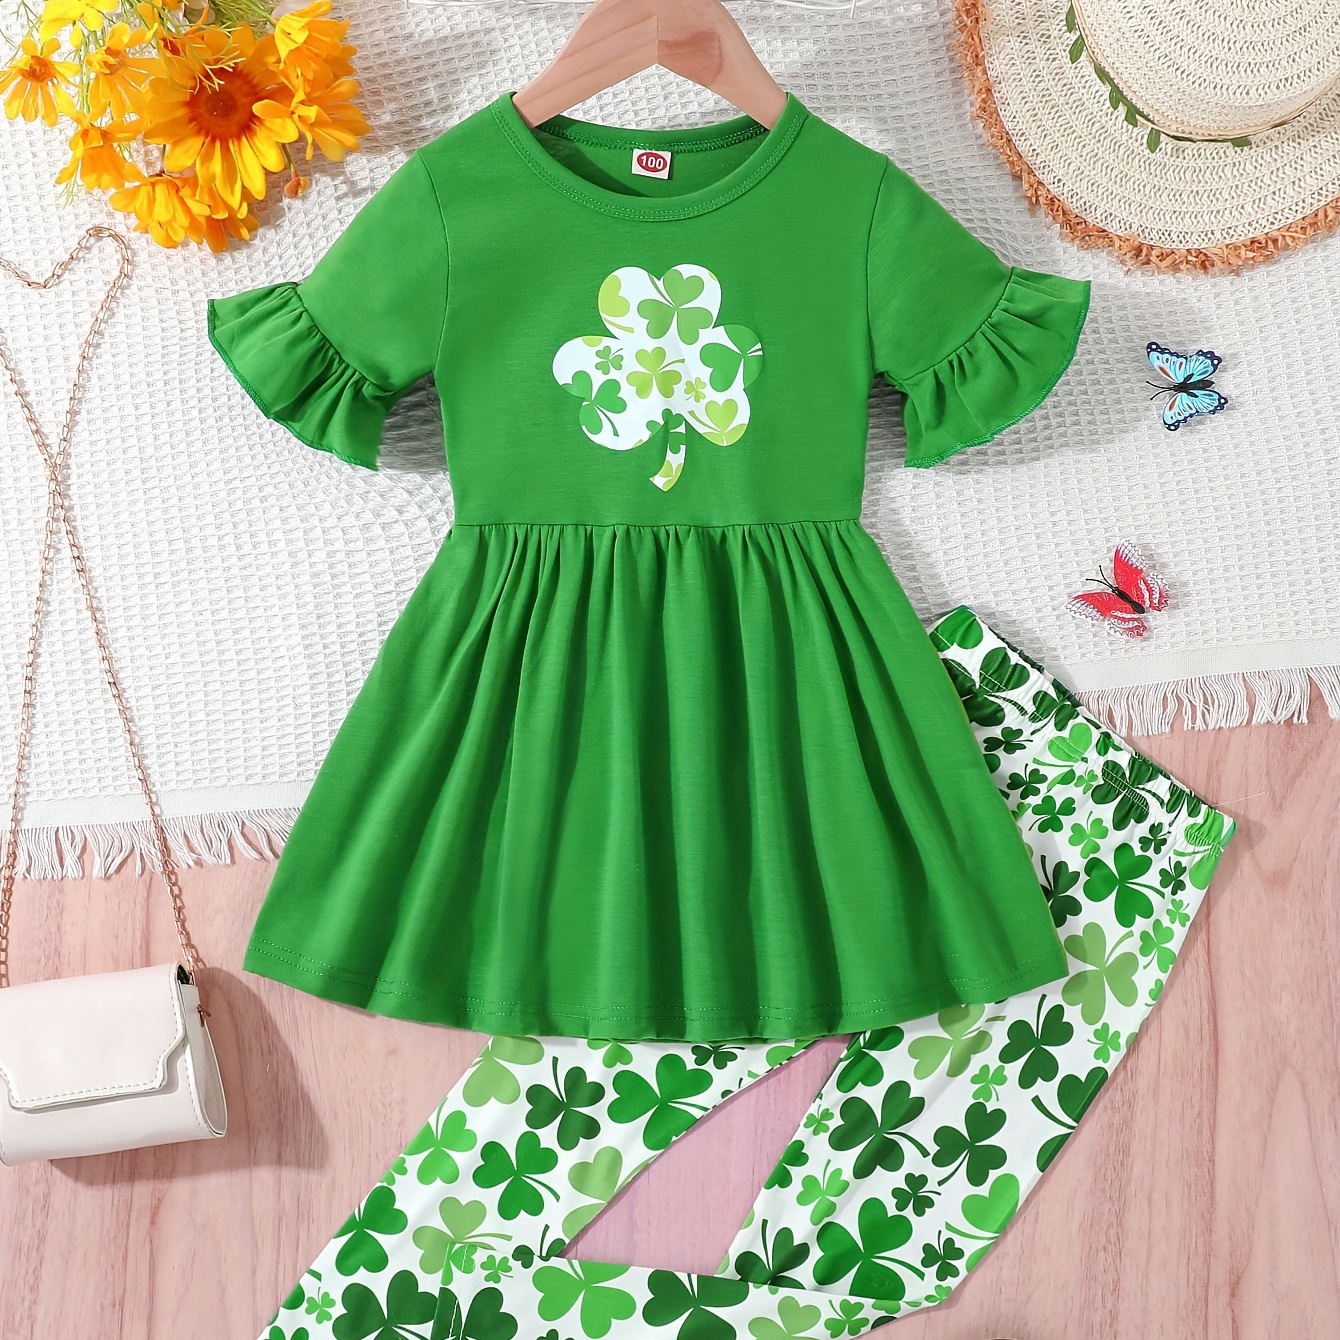 

Girls 2pcs St. Patrick's Day Clover Pattern Short Sleeve Peplum Top & Pants Holiday Outfit Set